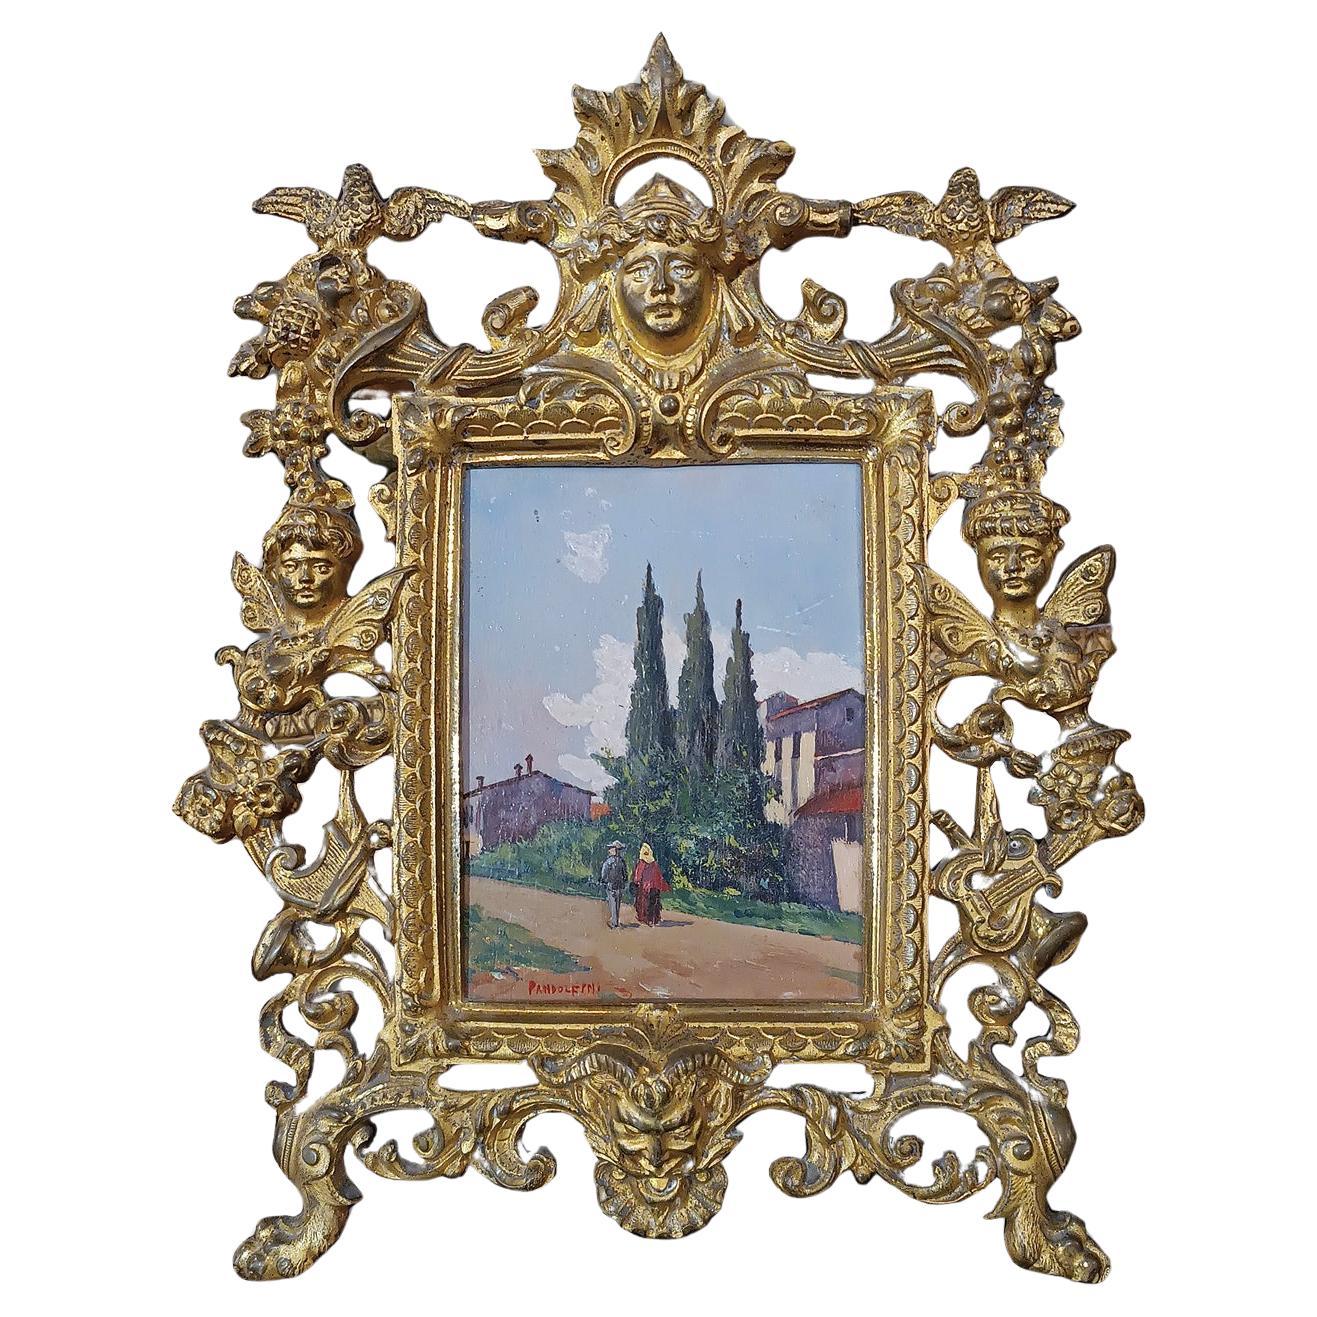 END OF THE 19th CENTURY GOLDEN BRONZE FRAME WITH SMALL PAINTING 